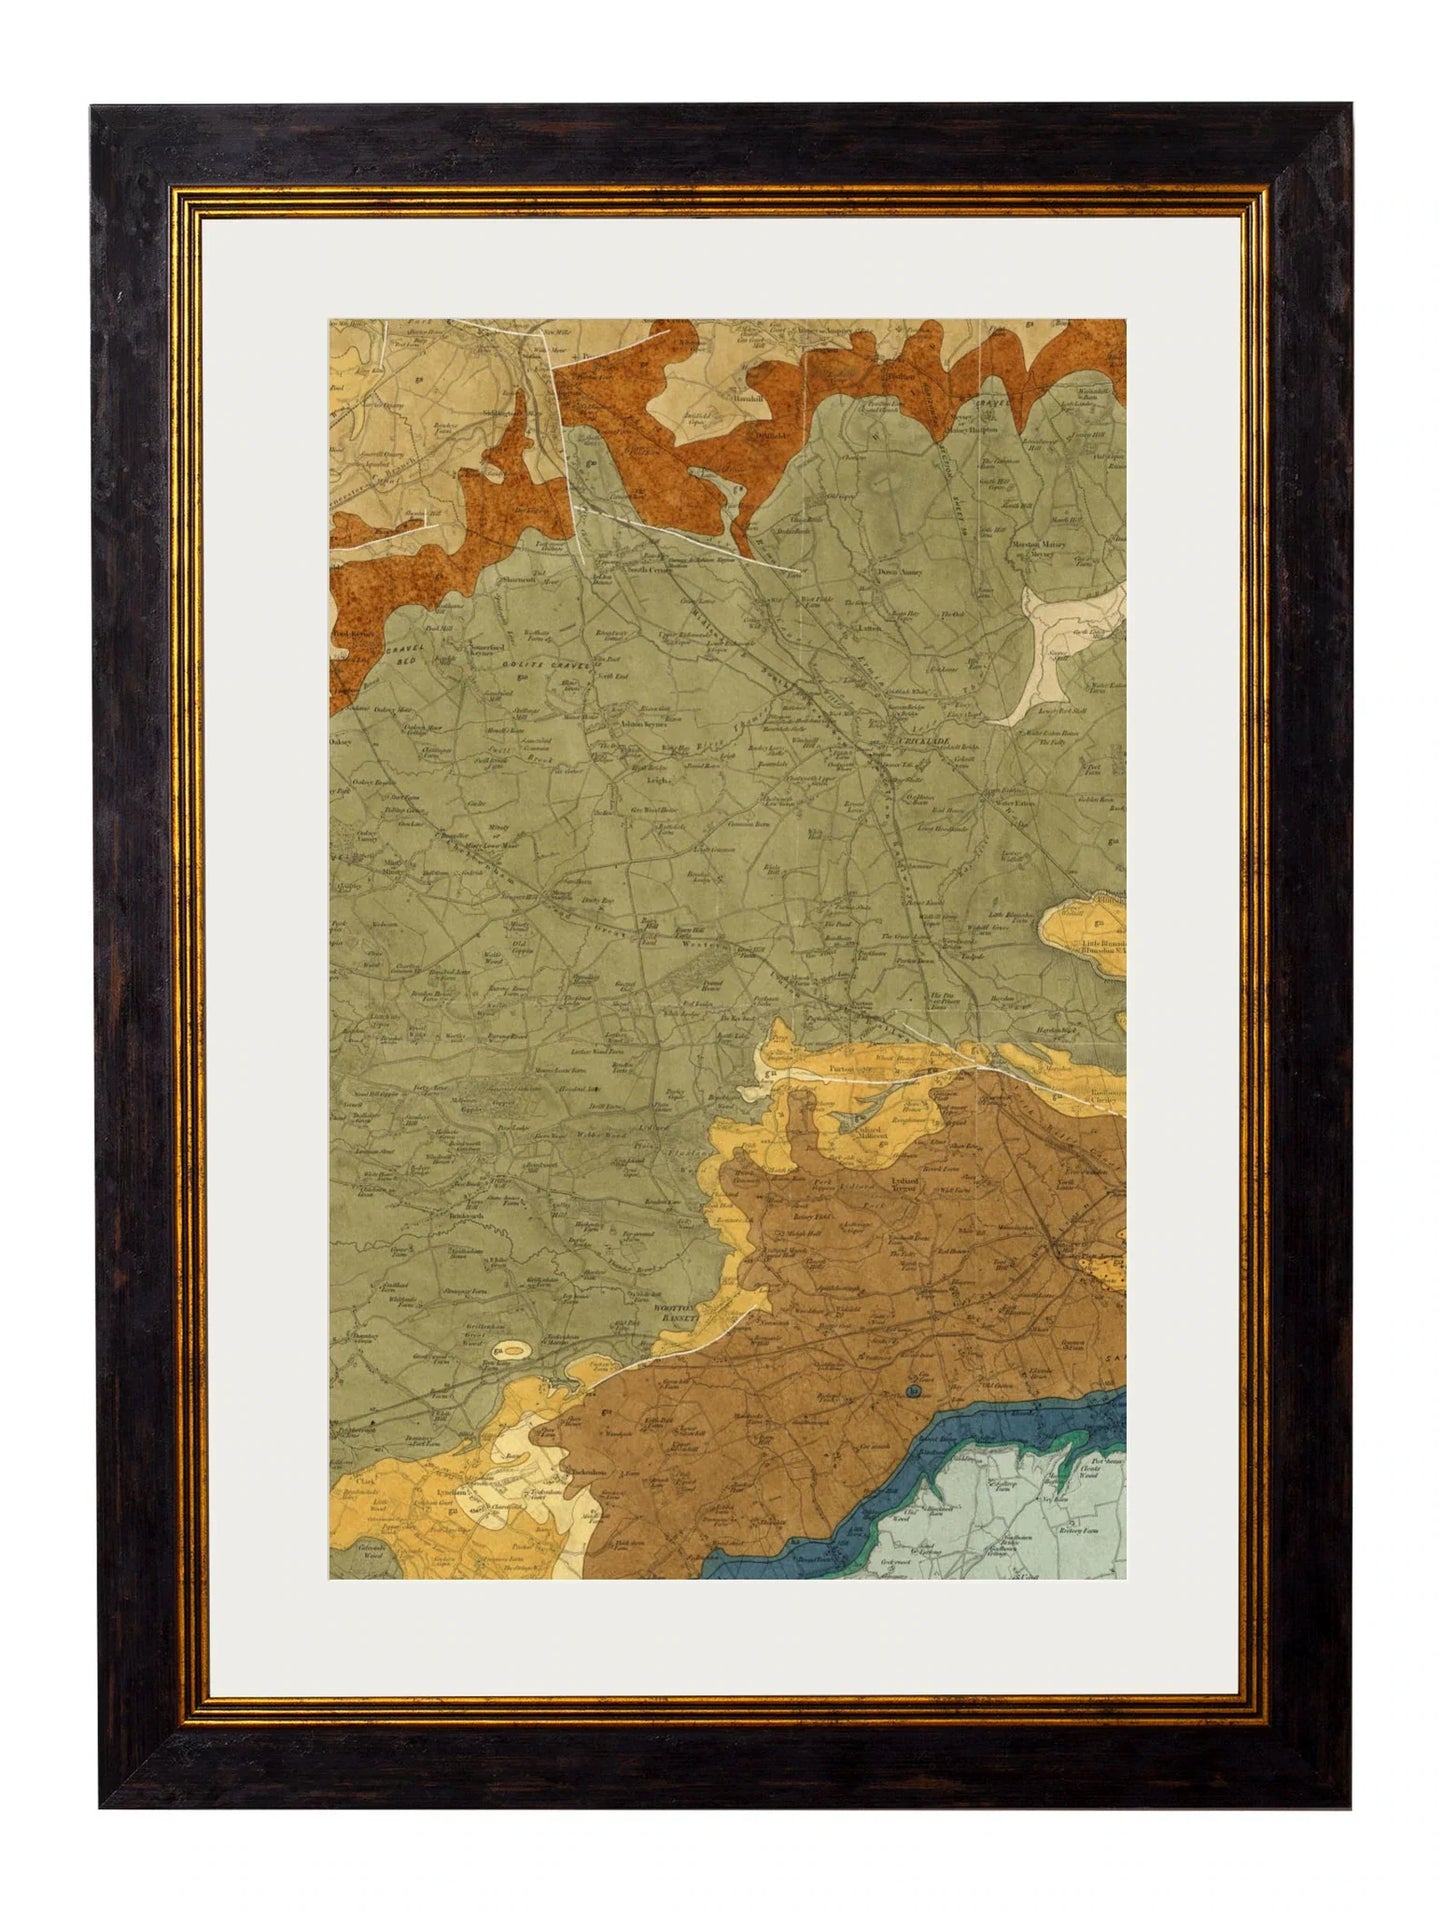 C.1850 British Geology Maps Frames for sale - Woodcock and Cavendish